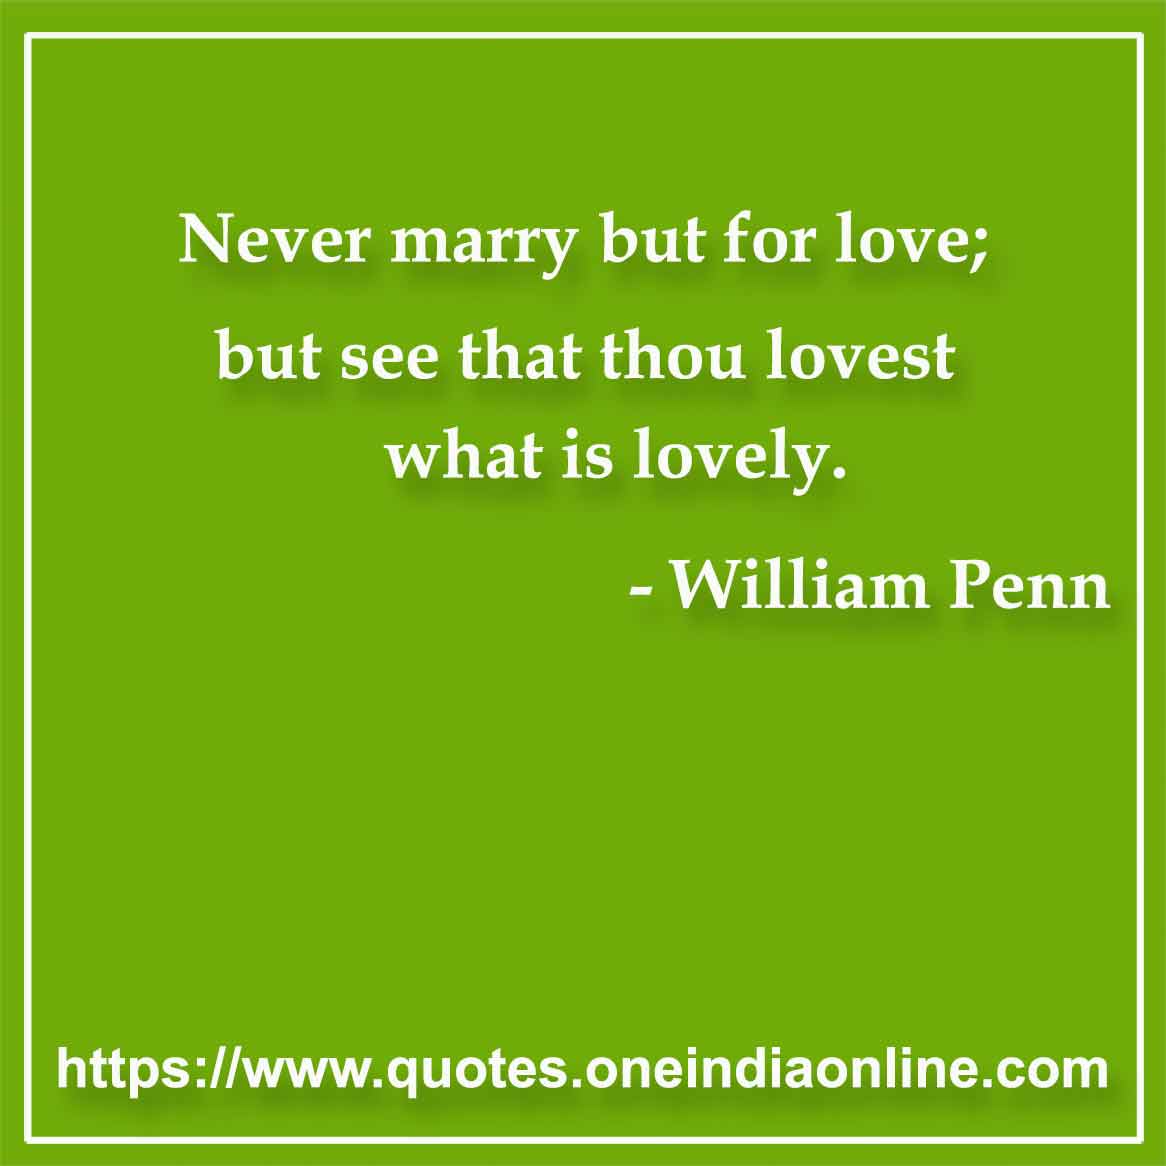 Never marry but for love; but see that thou lovest what is lovely.

- Marriage Quotes by William Penn